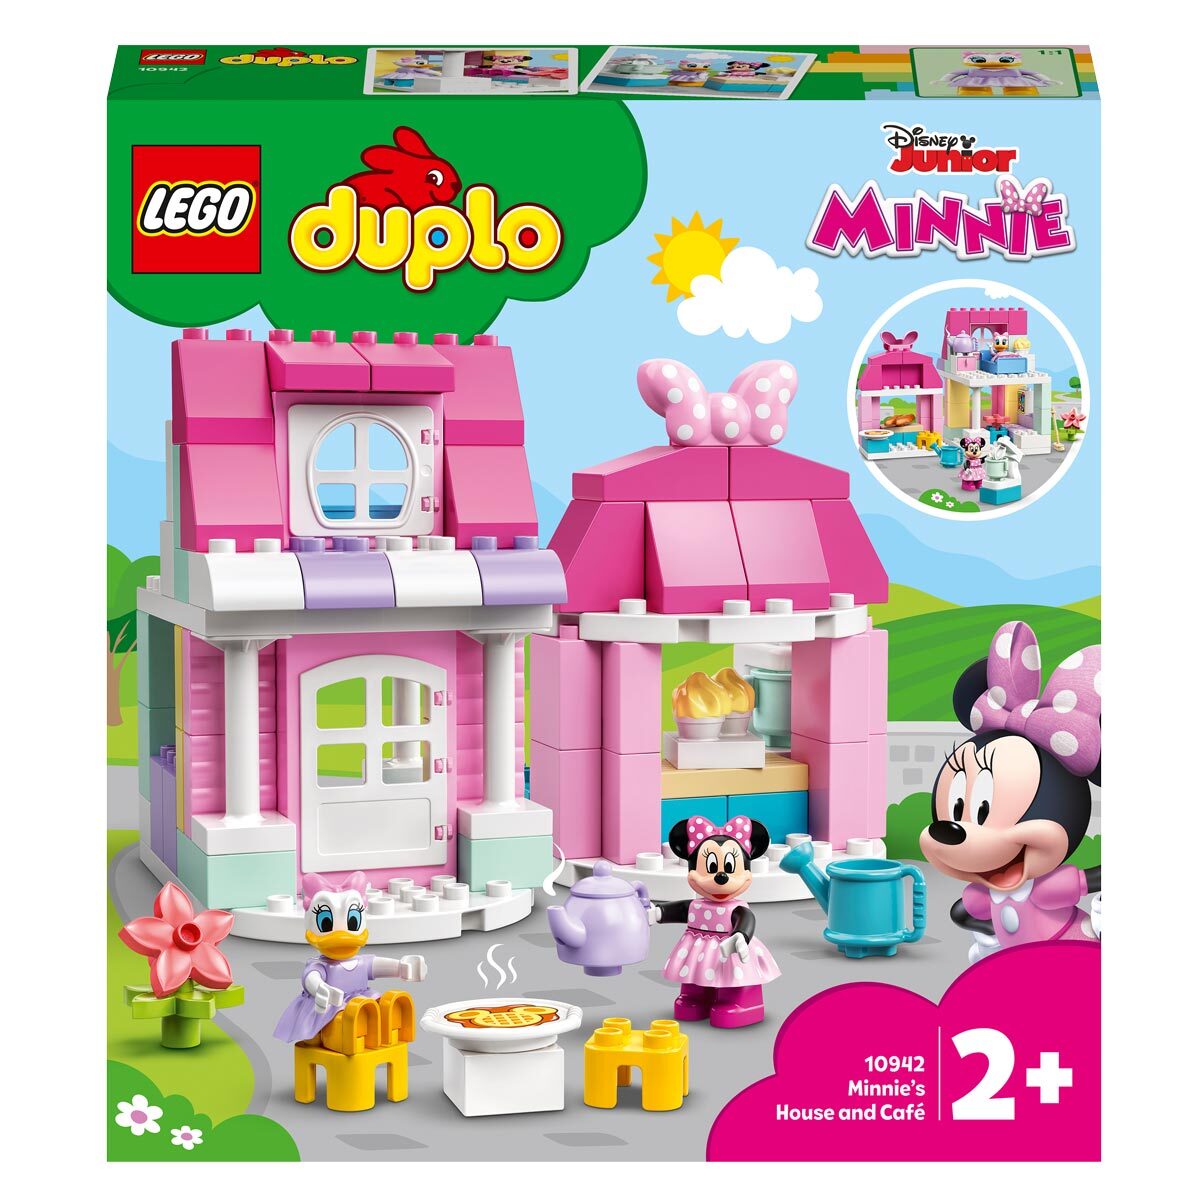 Buy LEGO DUPLO Minnie's House & Cafe Box Image at costco.co.uk